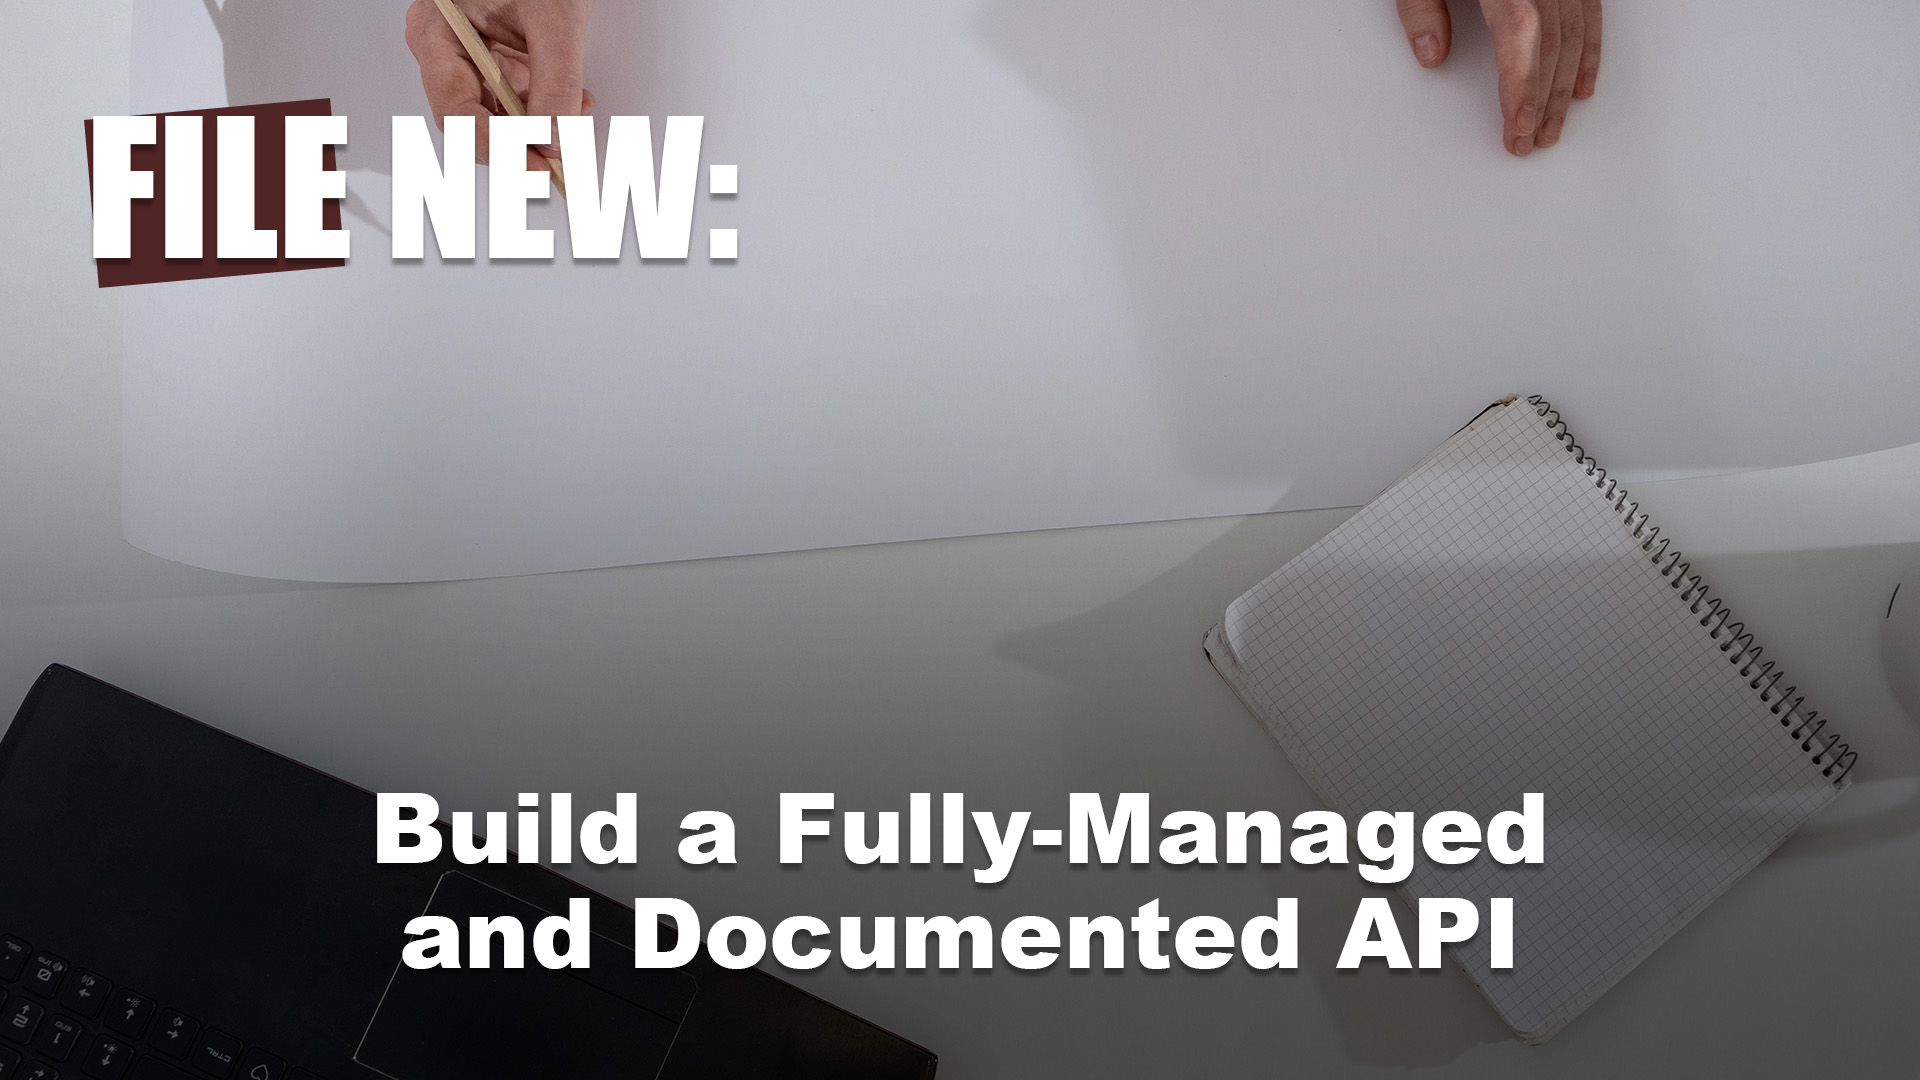 File New: Build a Fully-Managed and Documented API